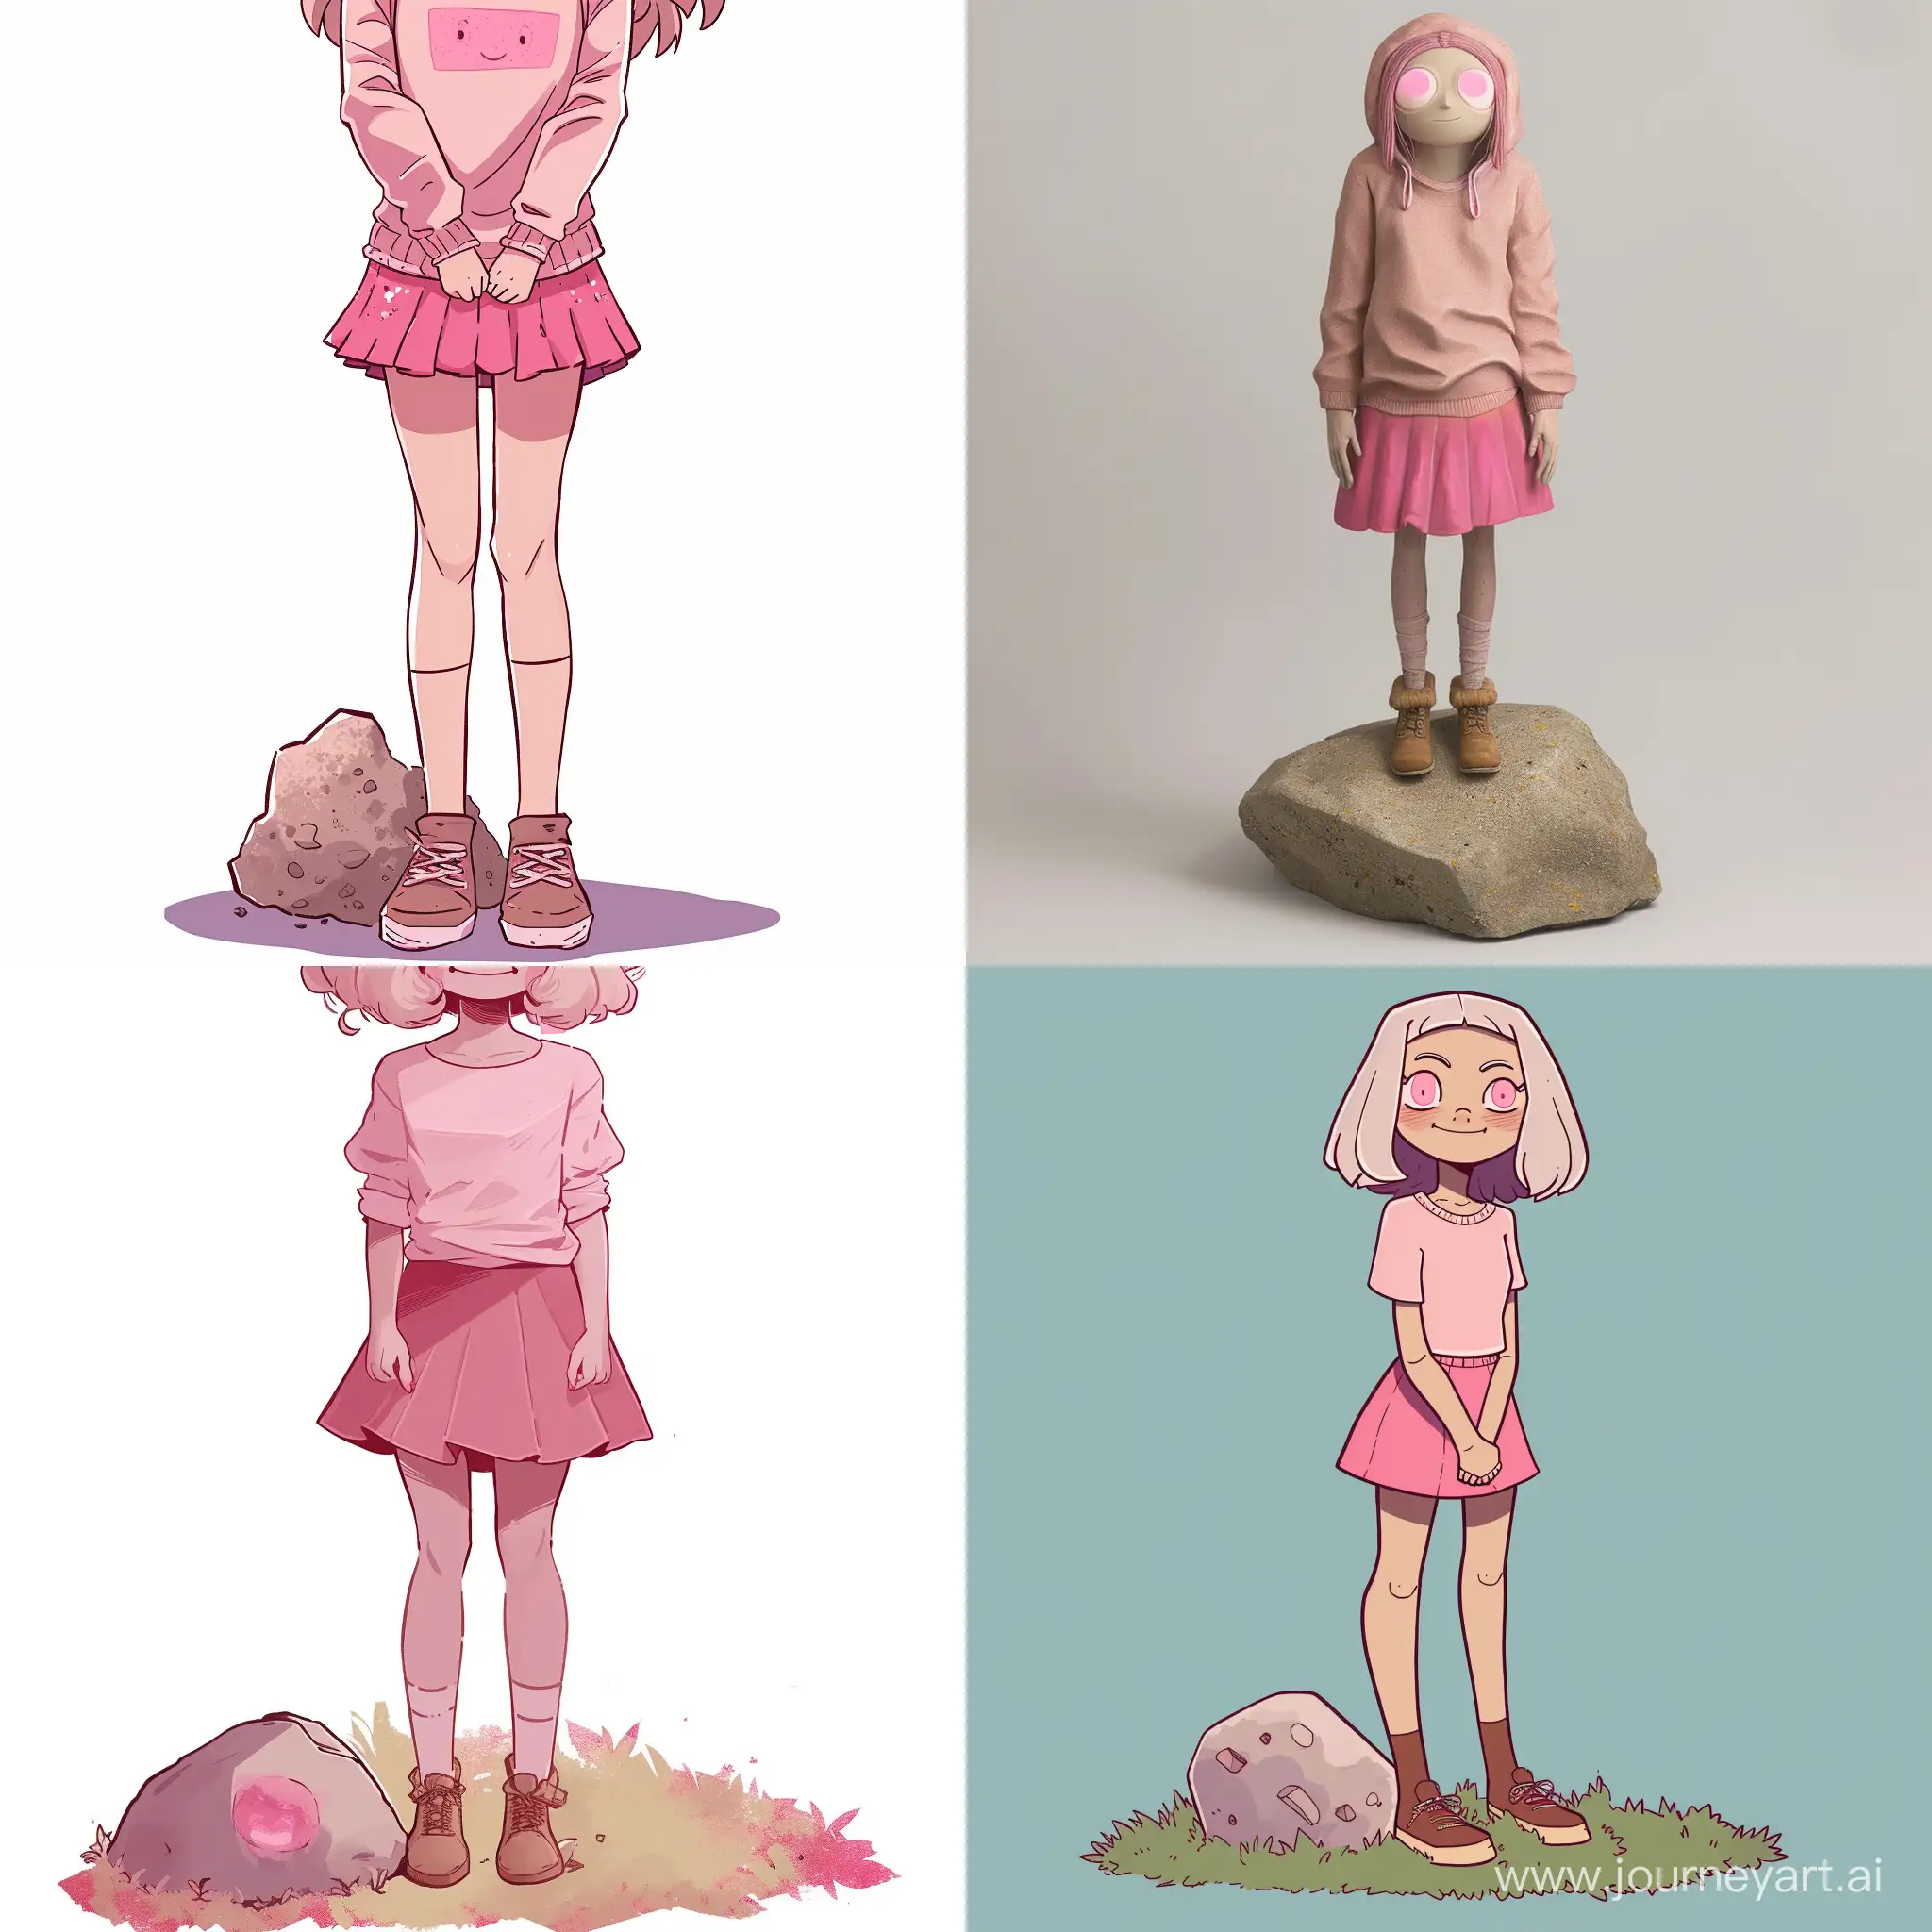 Cheerful-Girl-in-Pink-Attire-Standing-by-Rock-with-Brown-Shoes-and-Pink-Eyes